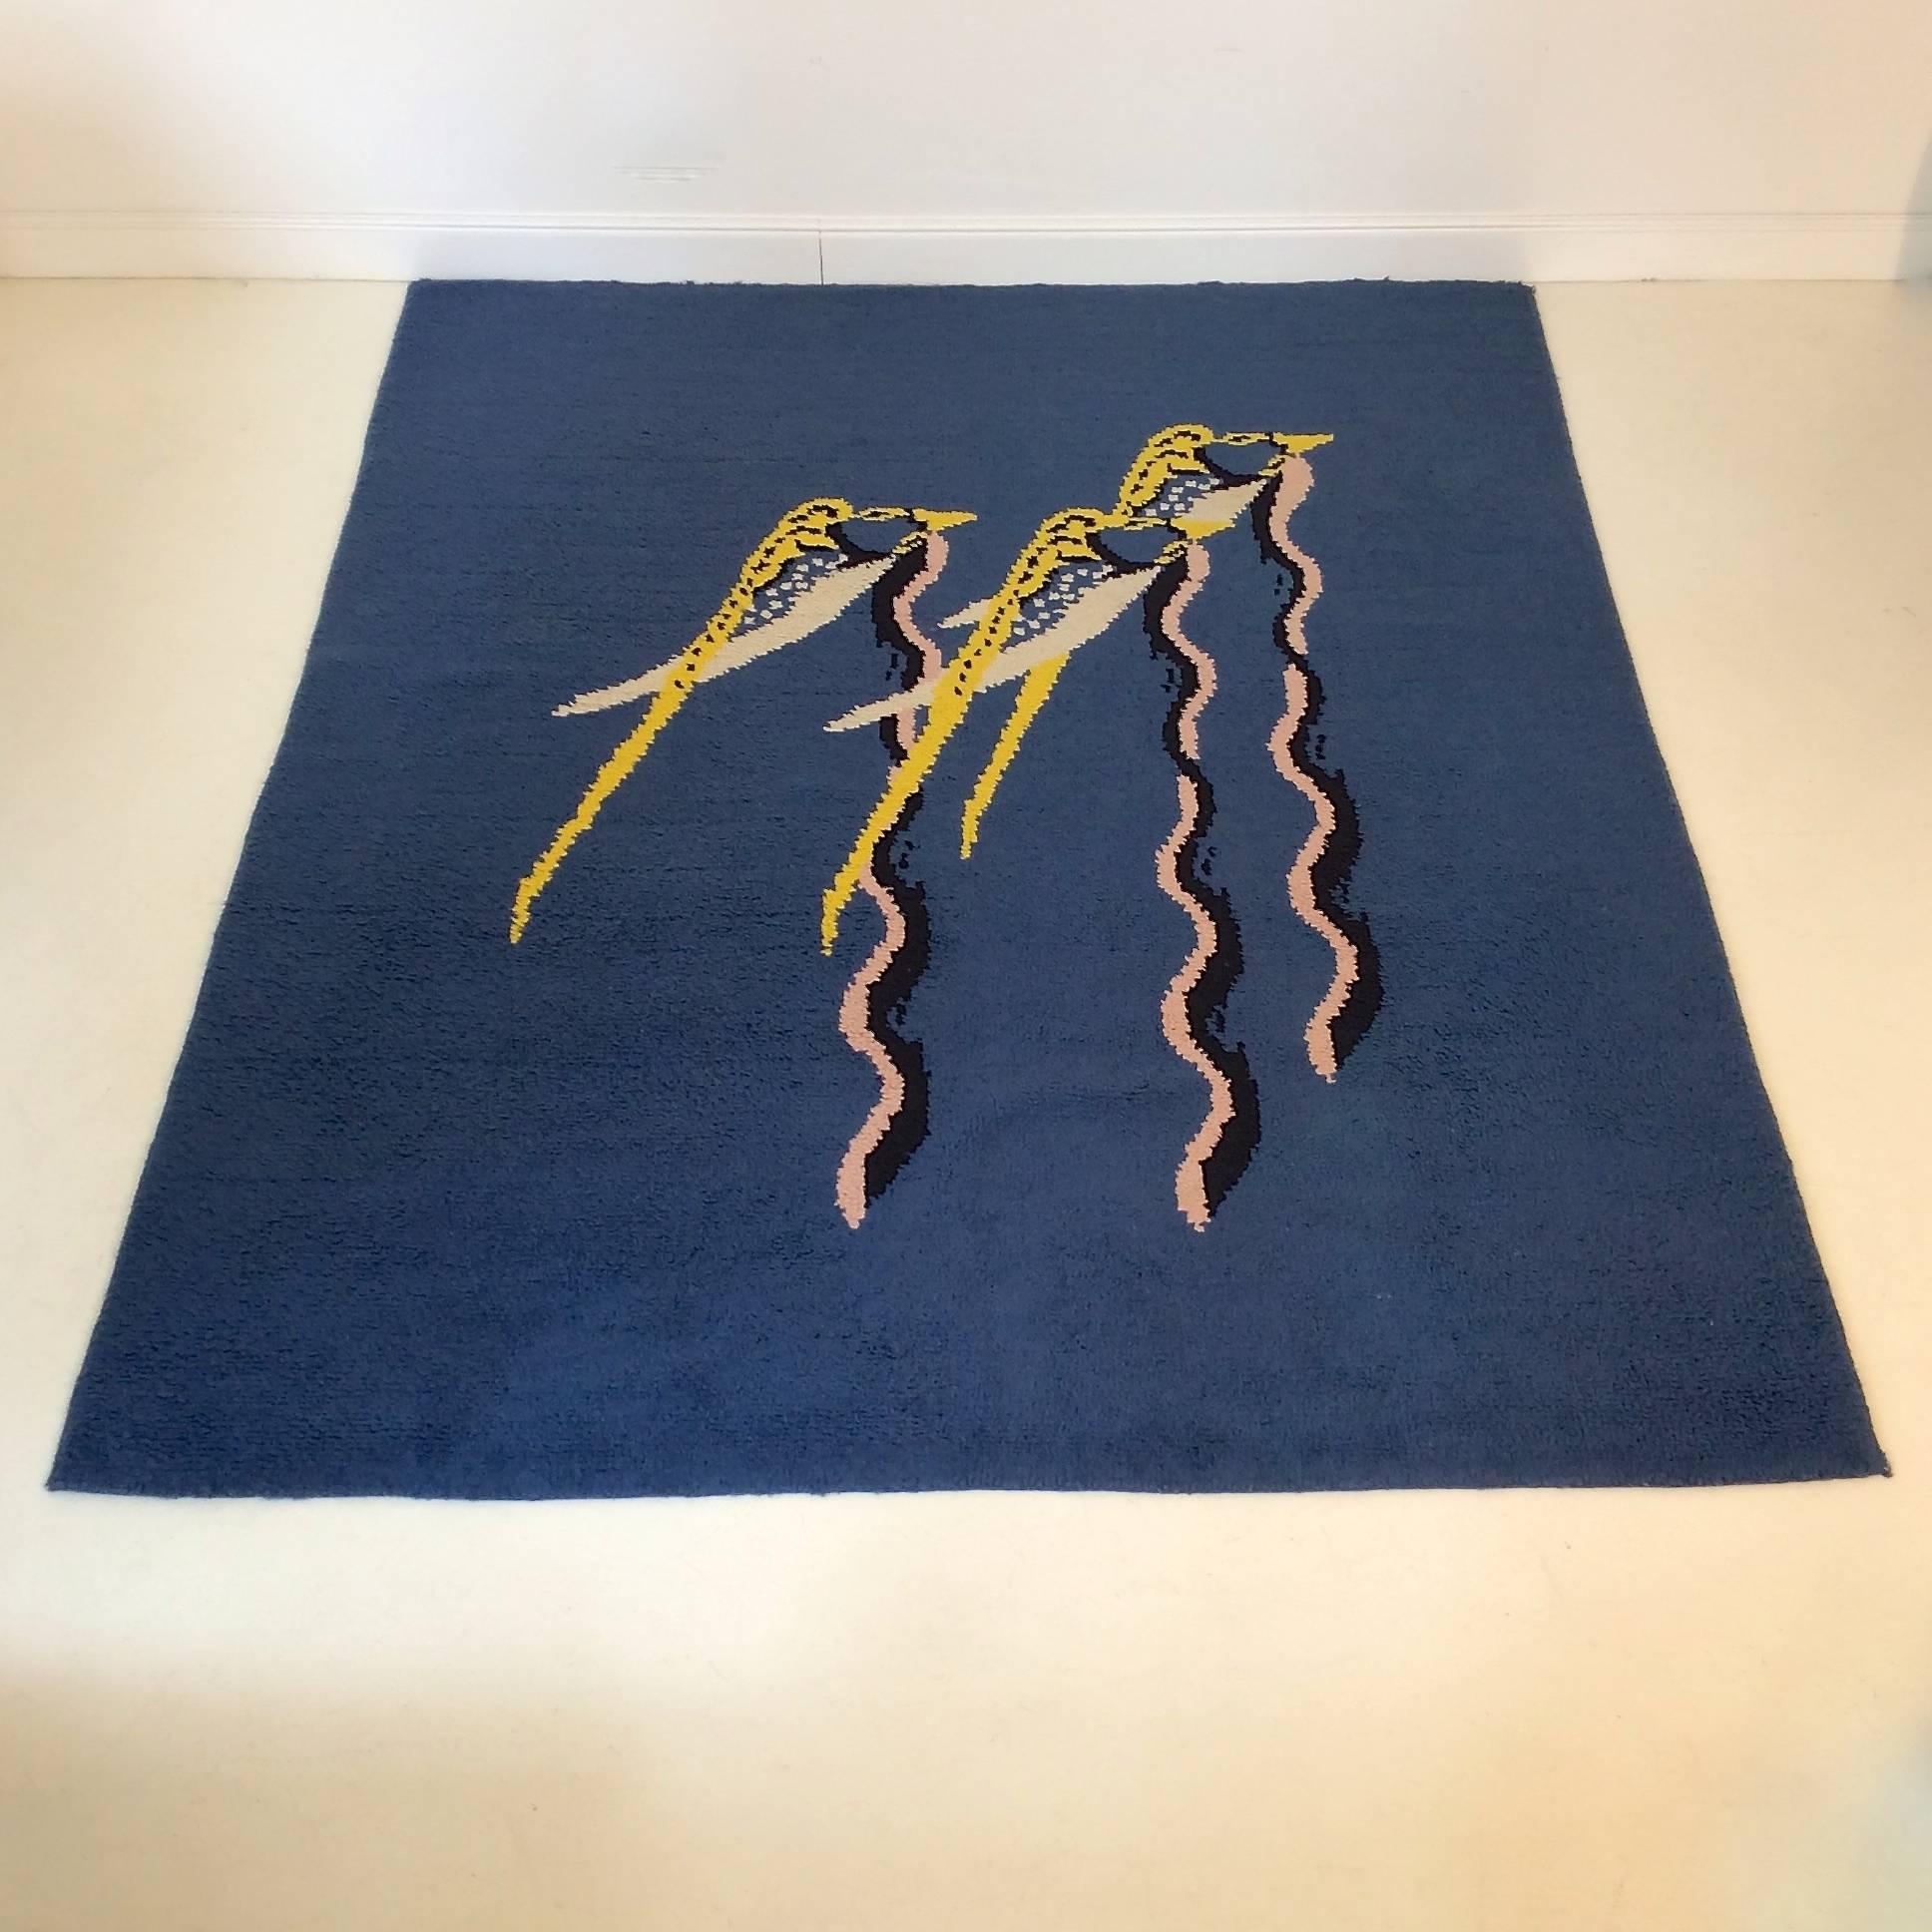 French wool carpet, circa 1930.
Deep blue with swallows decoration.
Yellow, light pink, black and white.
Dimensions: 240 x 195 cm.
Good original condition.